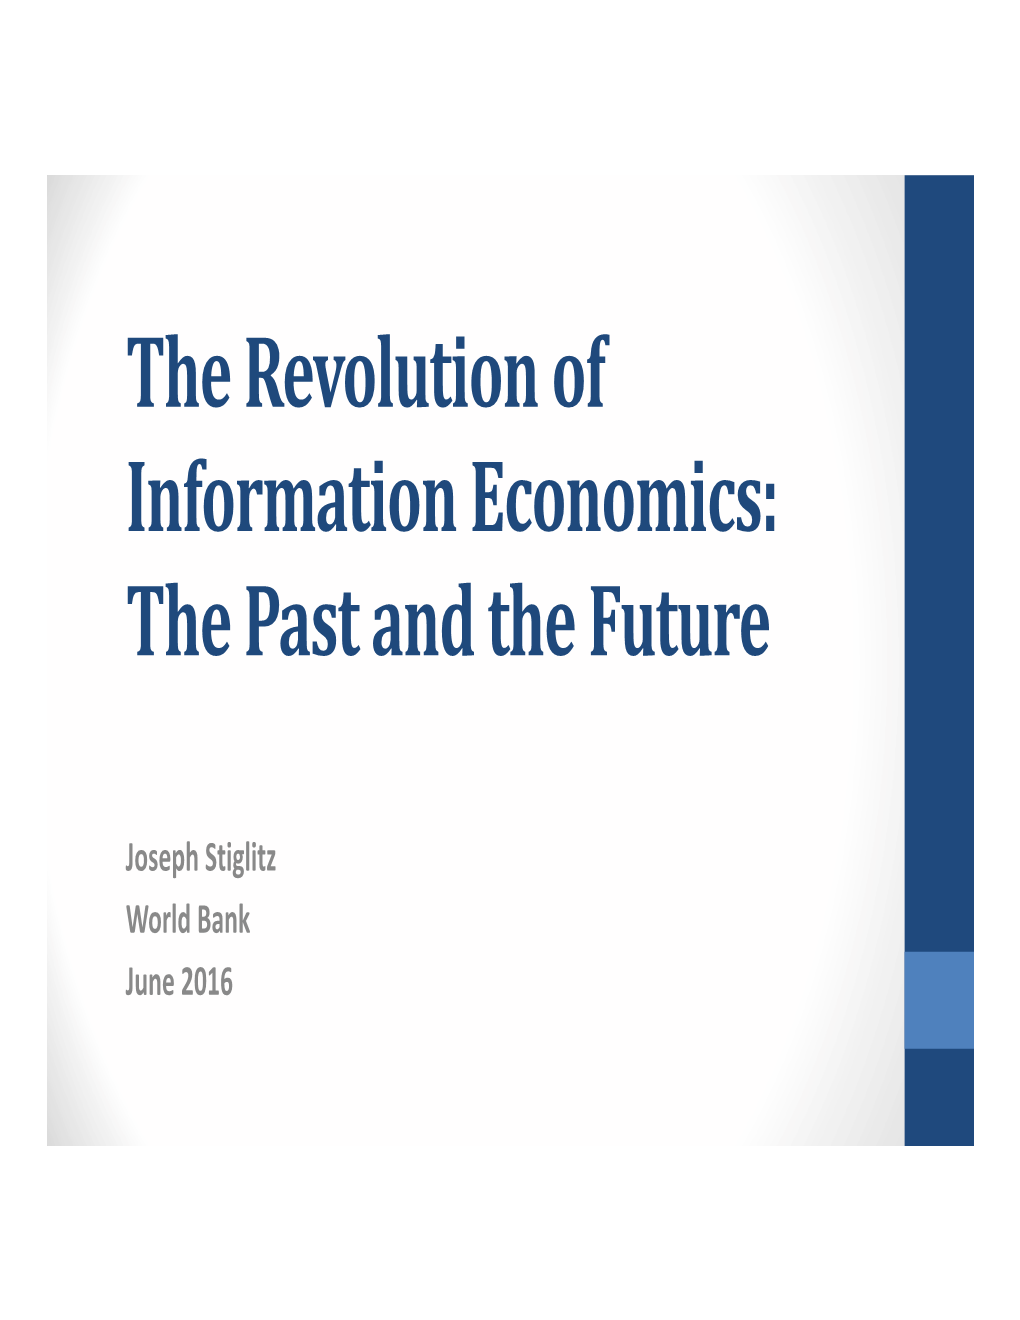 The Revolution of Information Economics: the Past and the Future